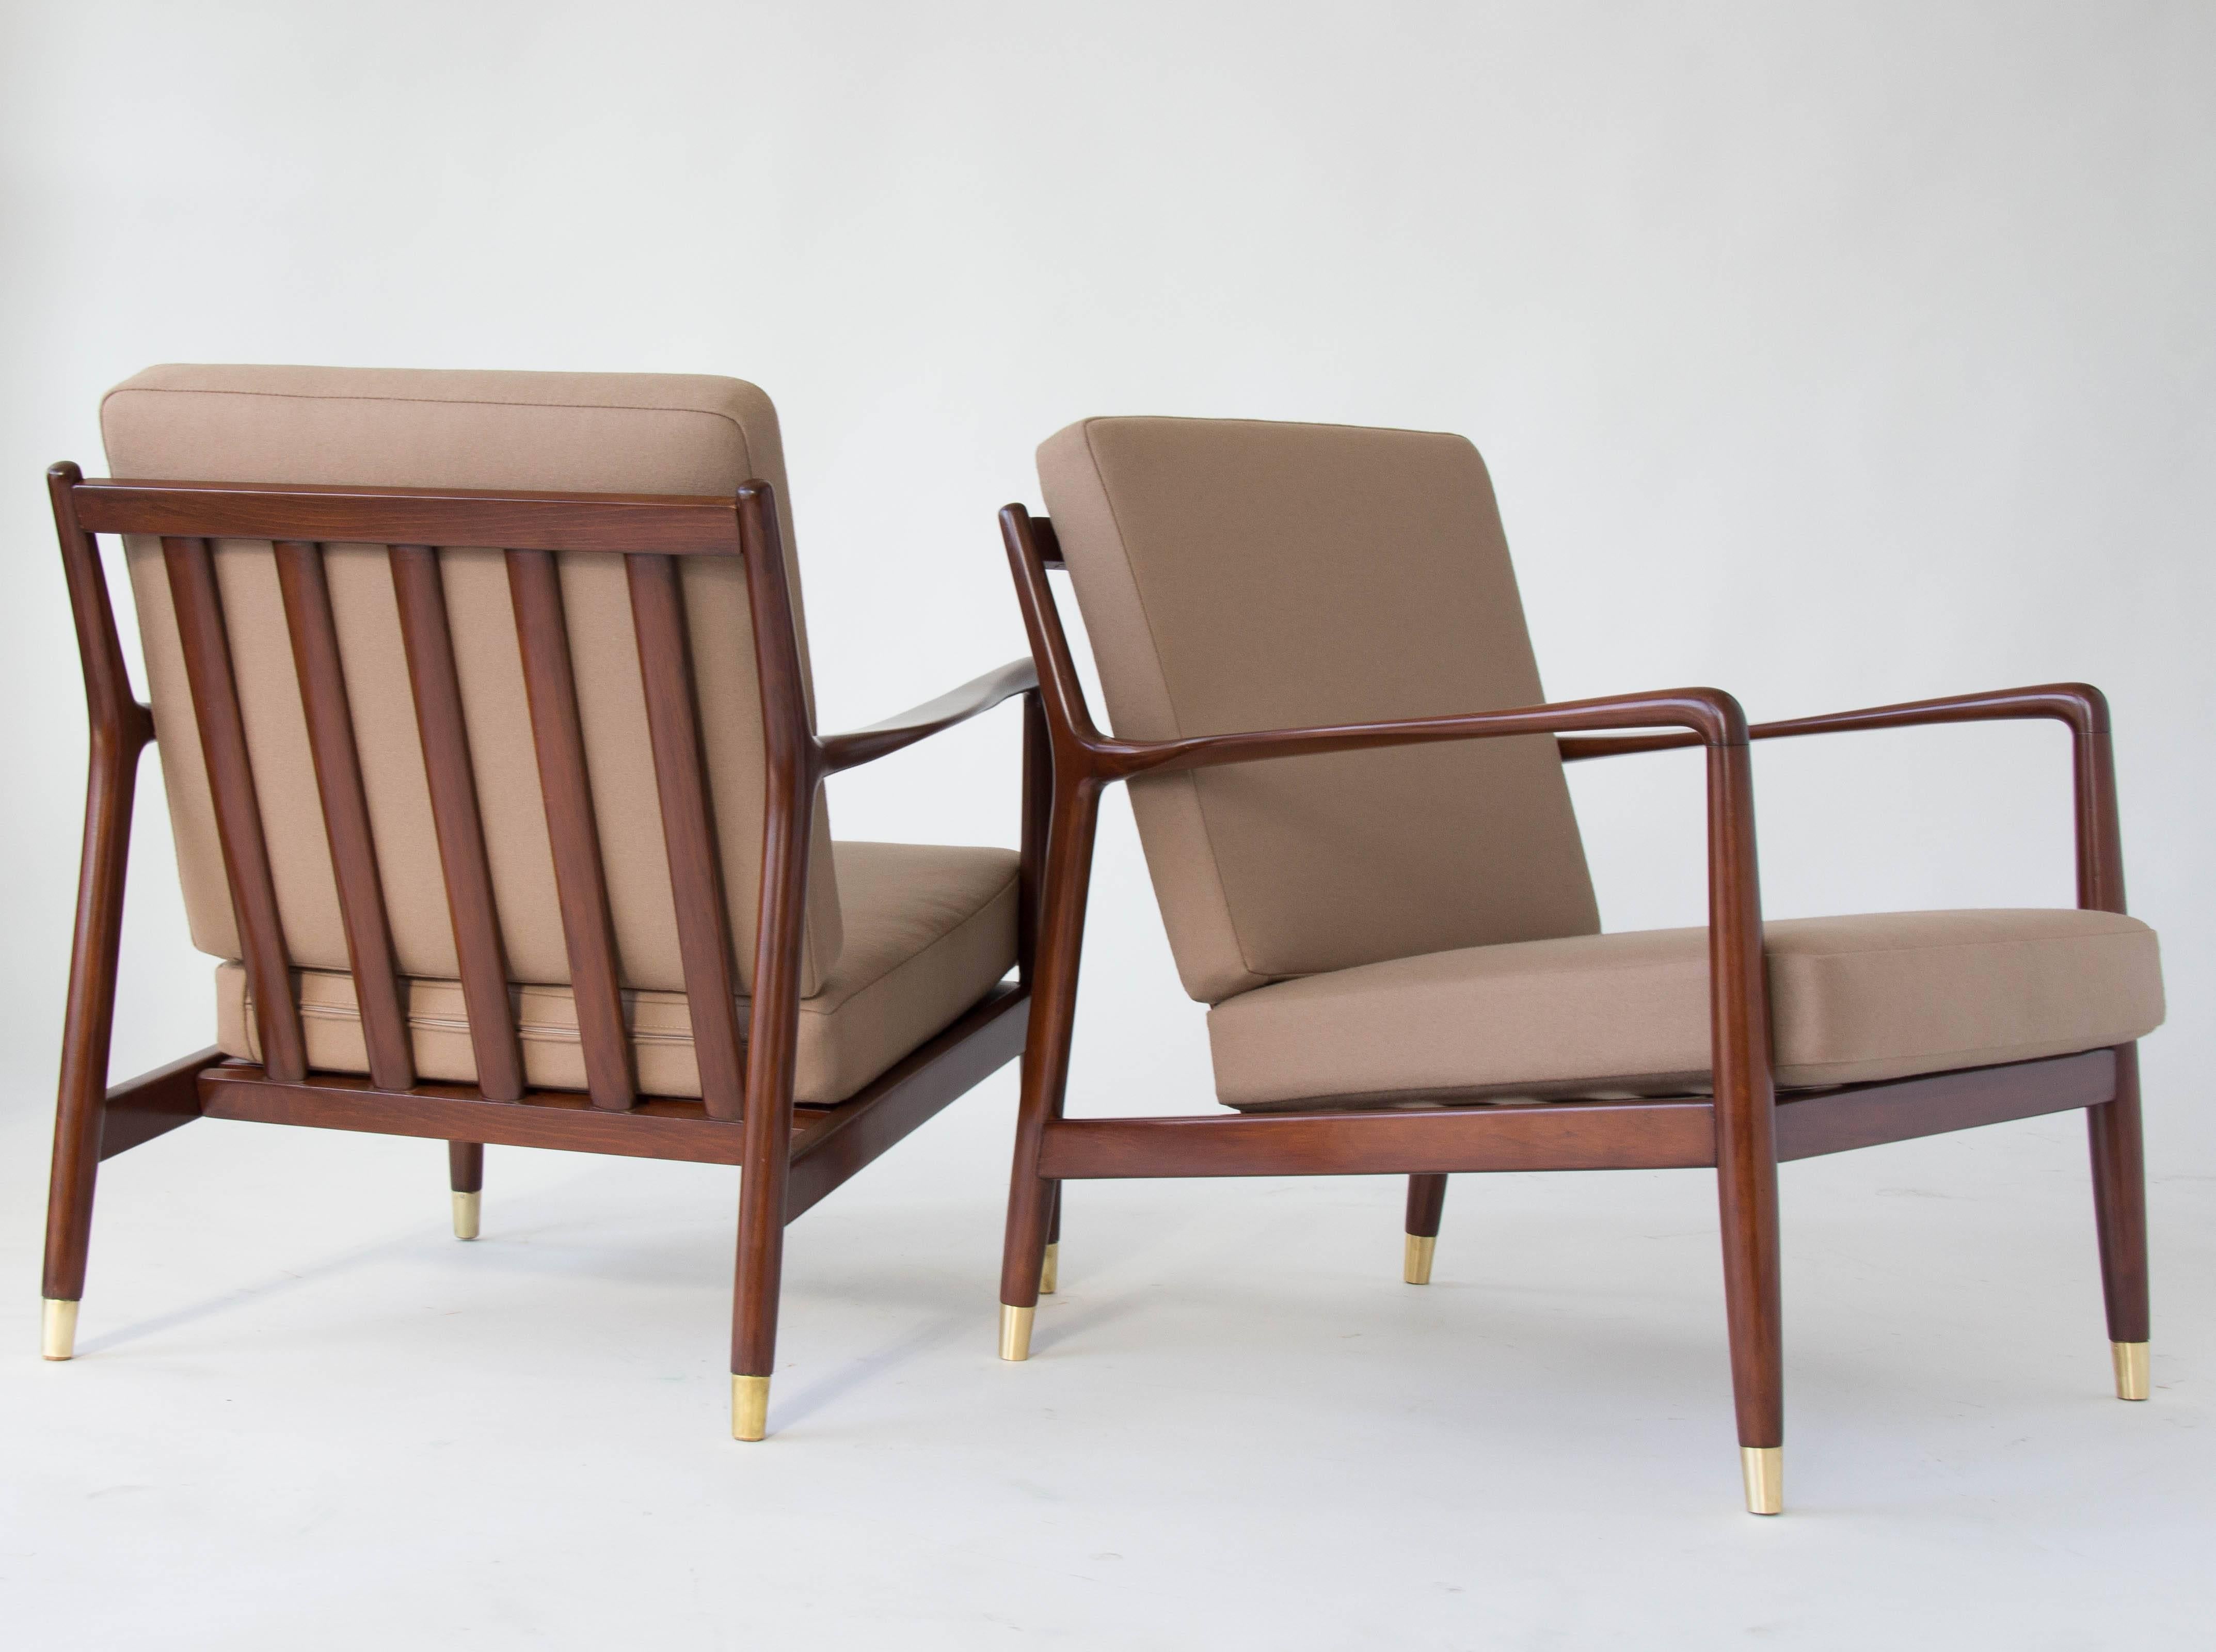 Pair of Lounge Chairs with Brass-Capped Legs by Folke Ohlsson for DUX (Messing)